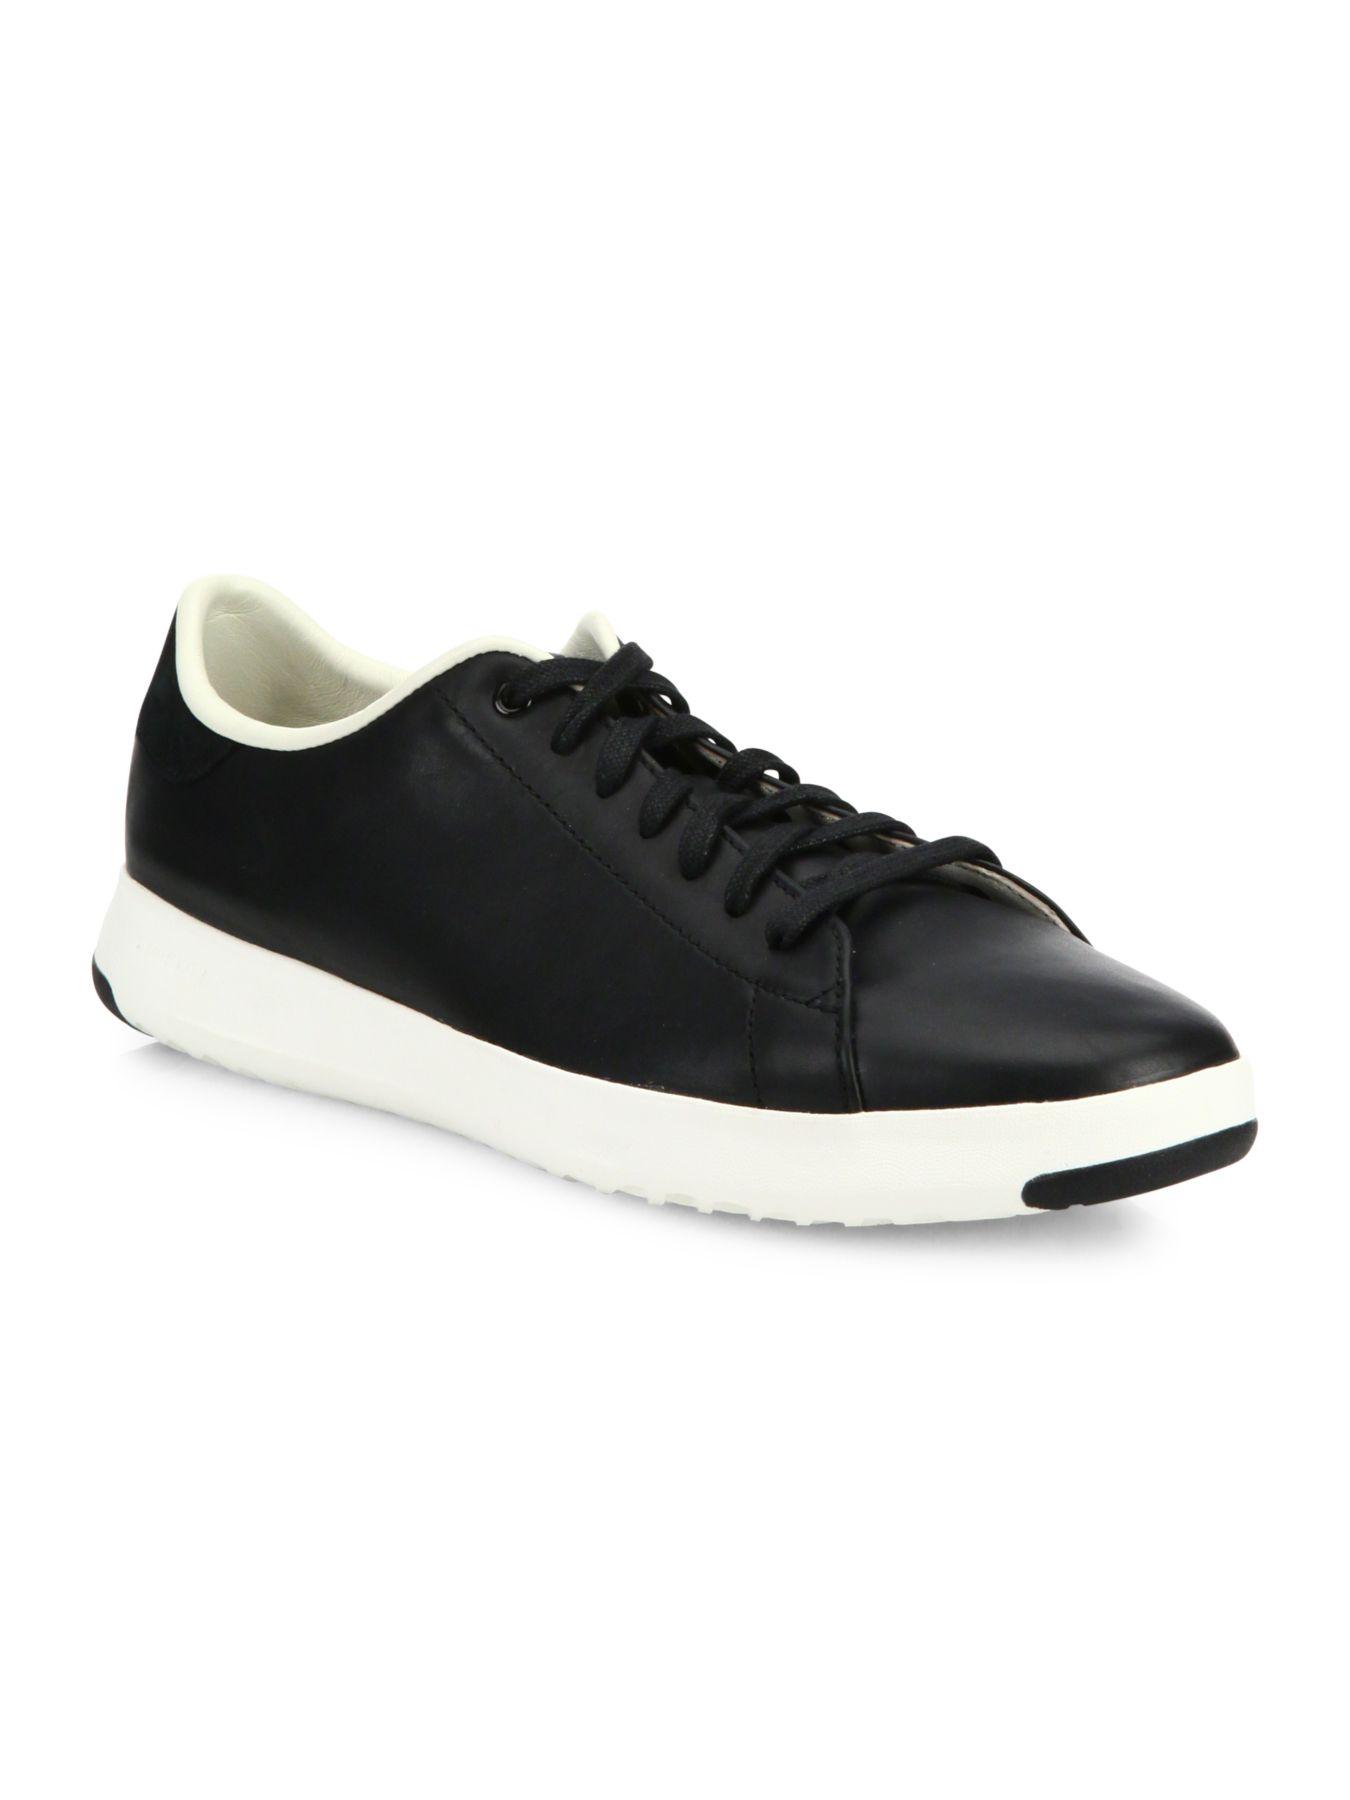 Cole Haan Leather Grand Pro Tennis in Black for Men - Save 72% - Lyst